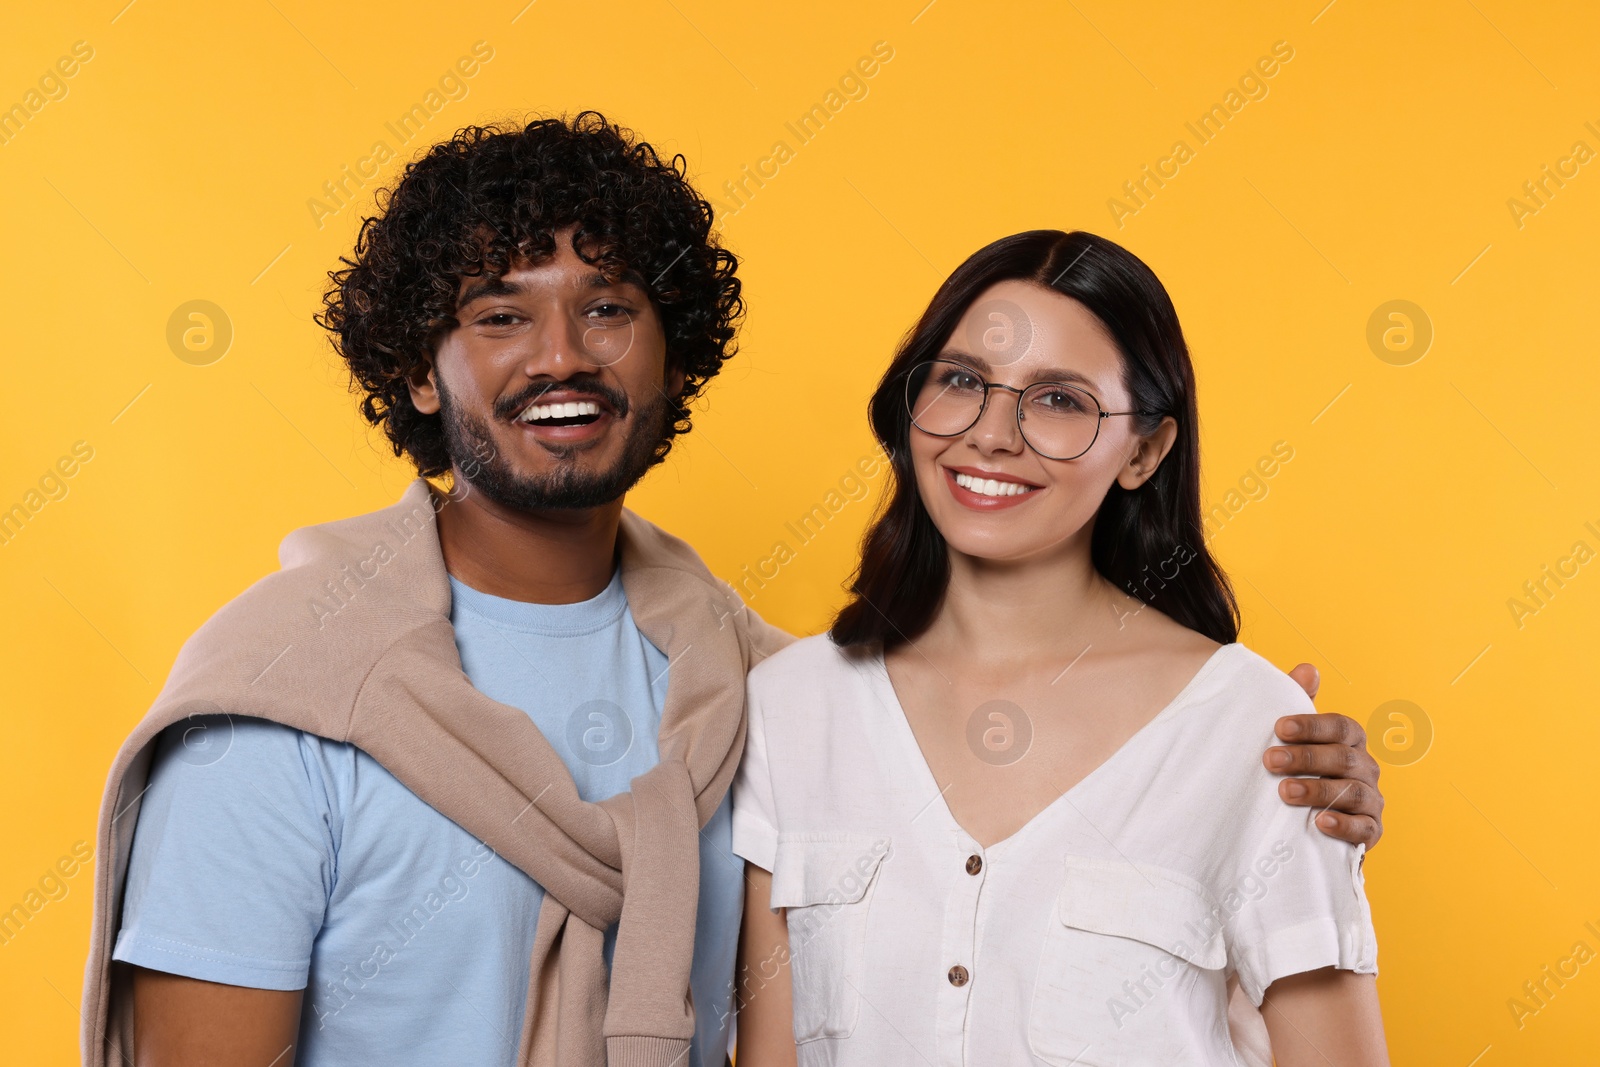 Photo of International dating. Portrait of happy couple on yellow background